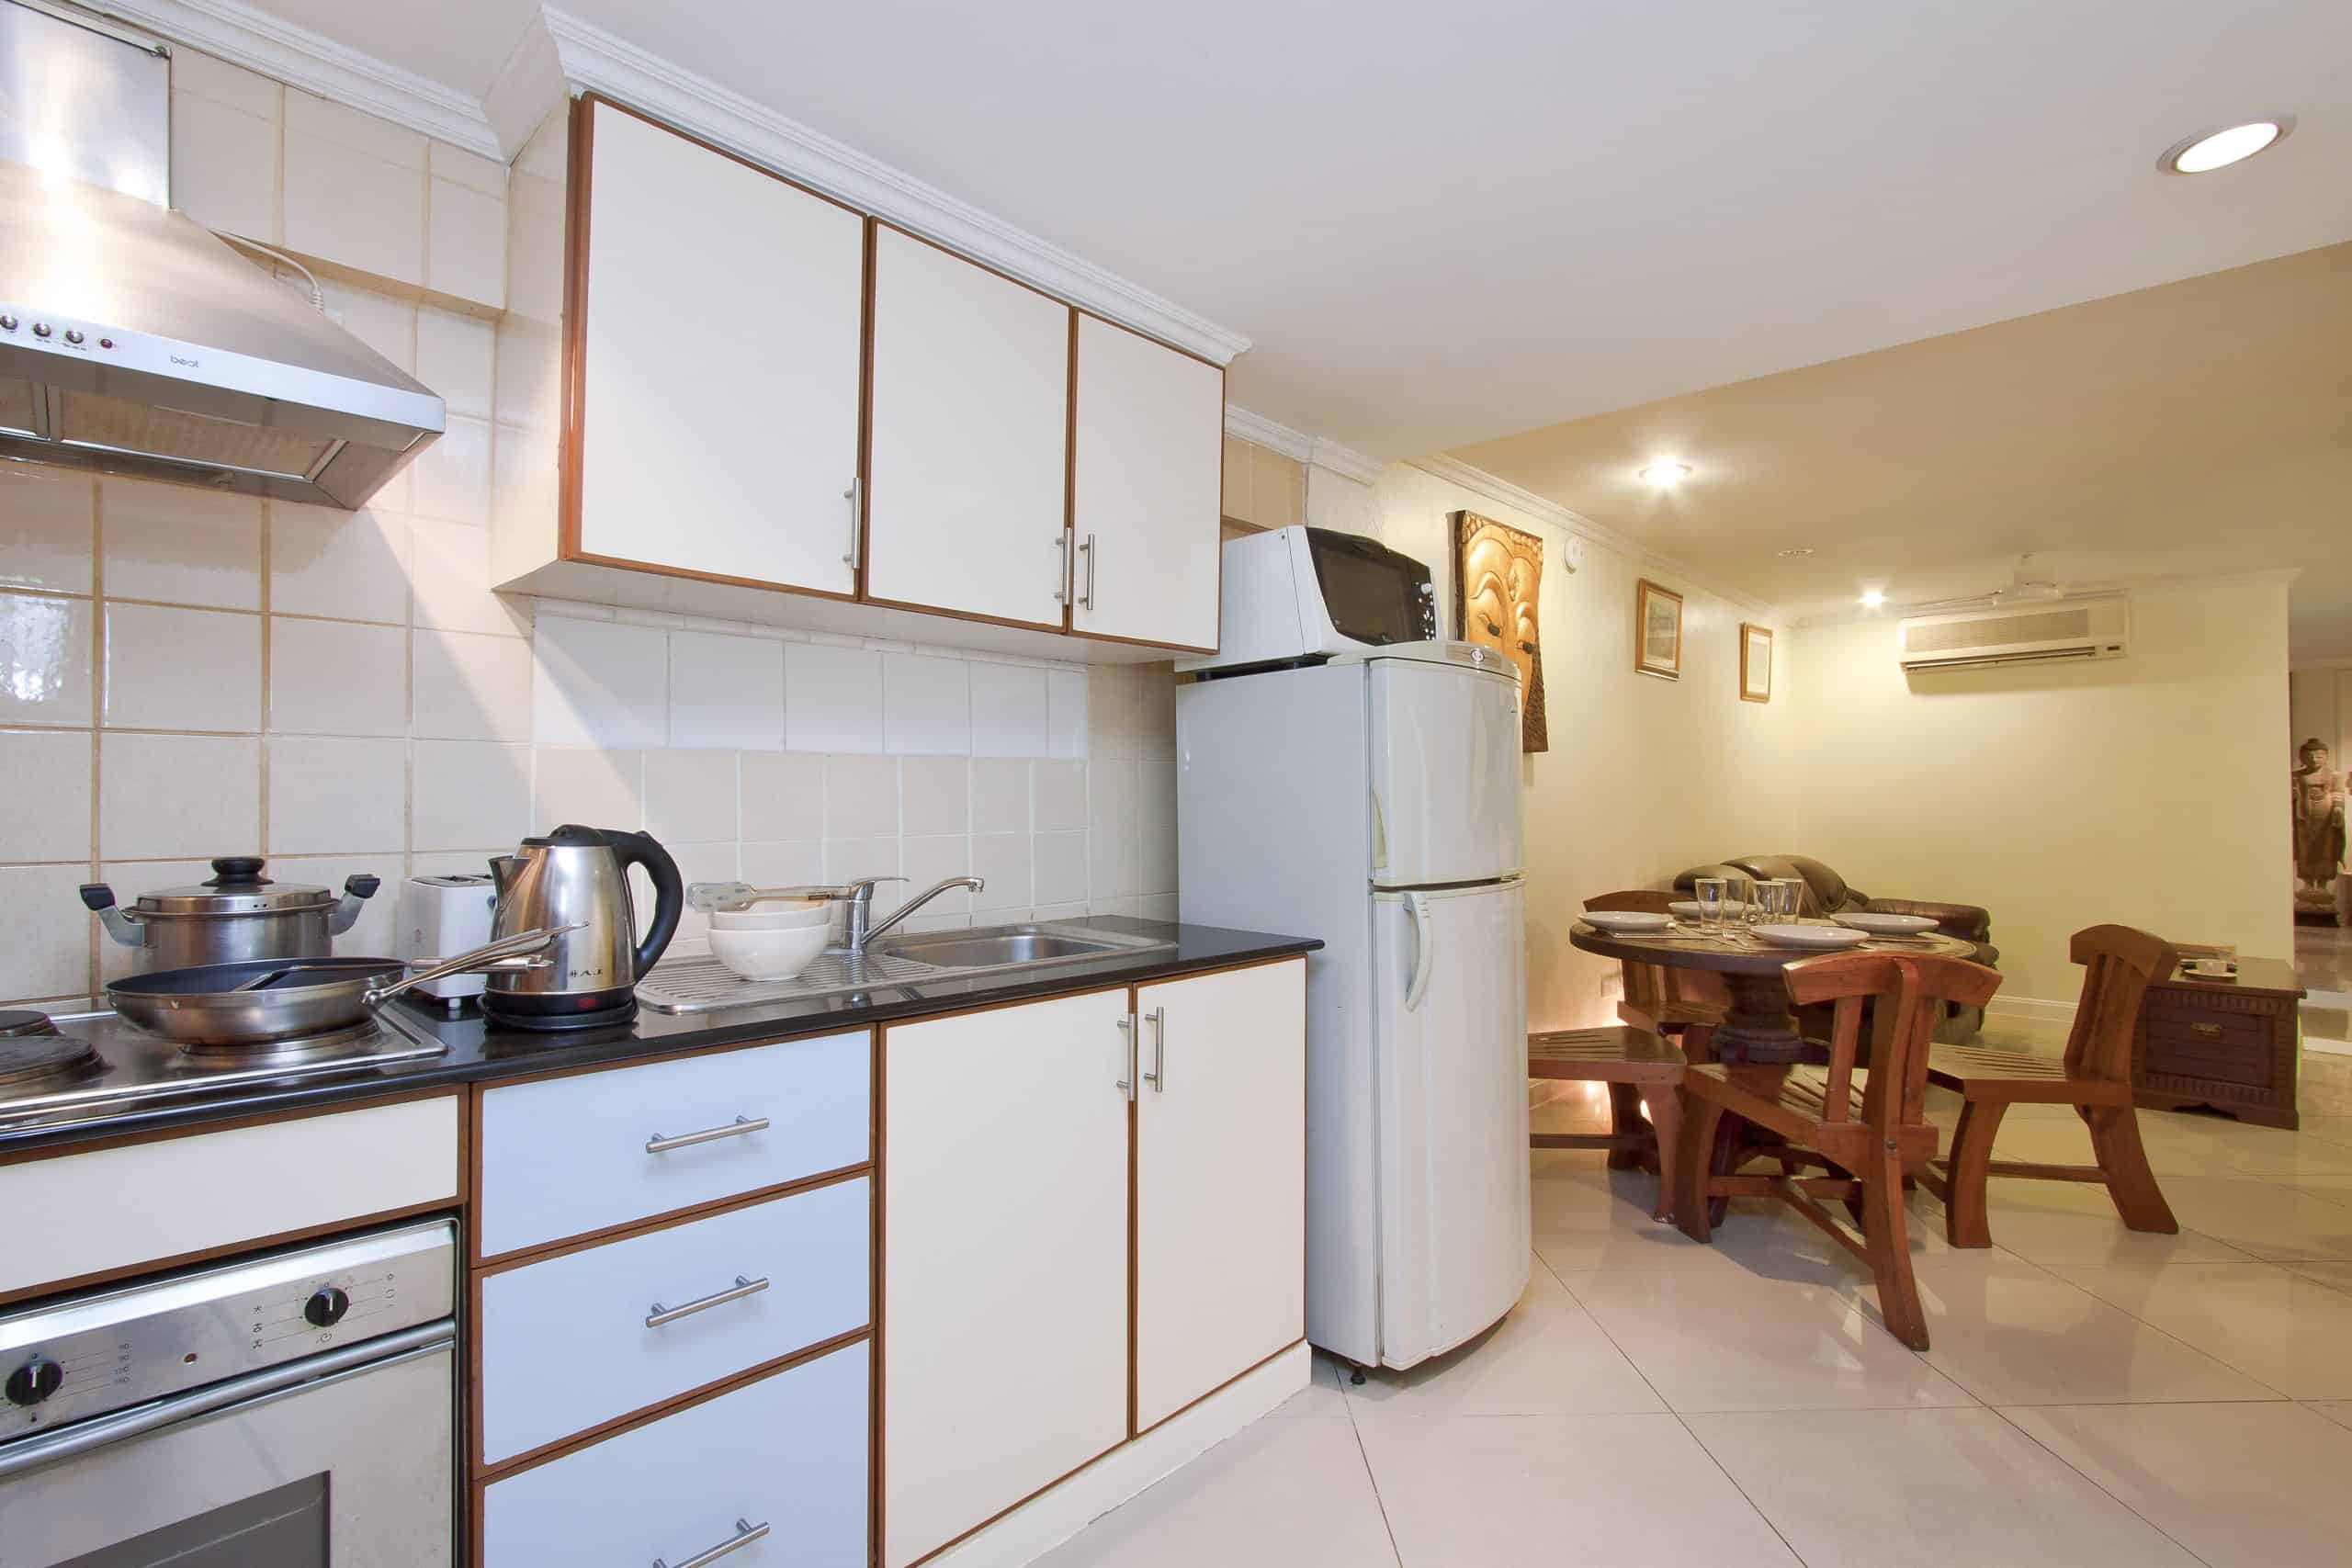 Experience the ultimate holiday stay in this comfortable and stylish studio apartment in Pattaya, offering a cozy bed, functional kitchenette, private shower, air conditioning, and Wi-Fi for your convenience